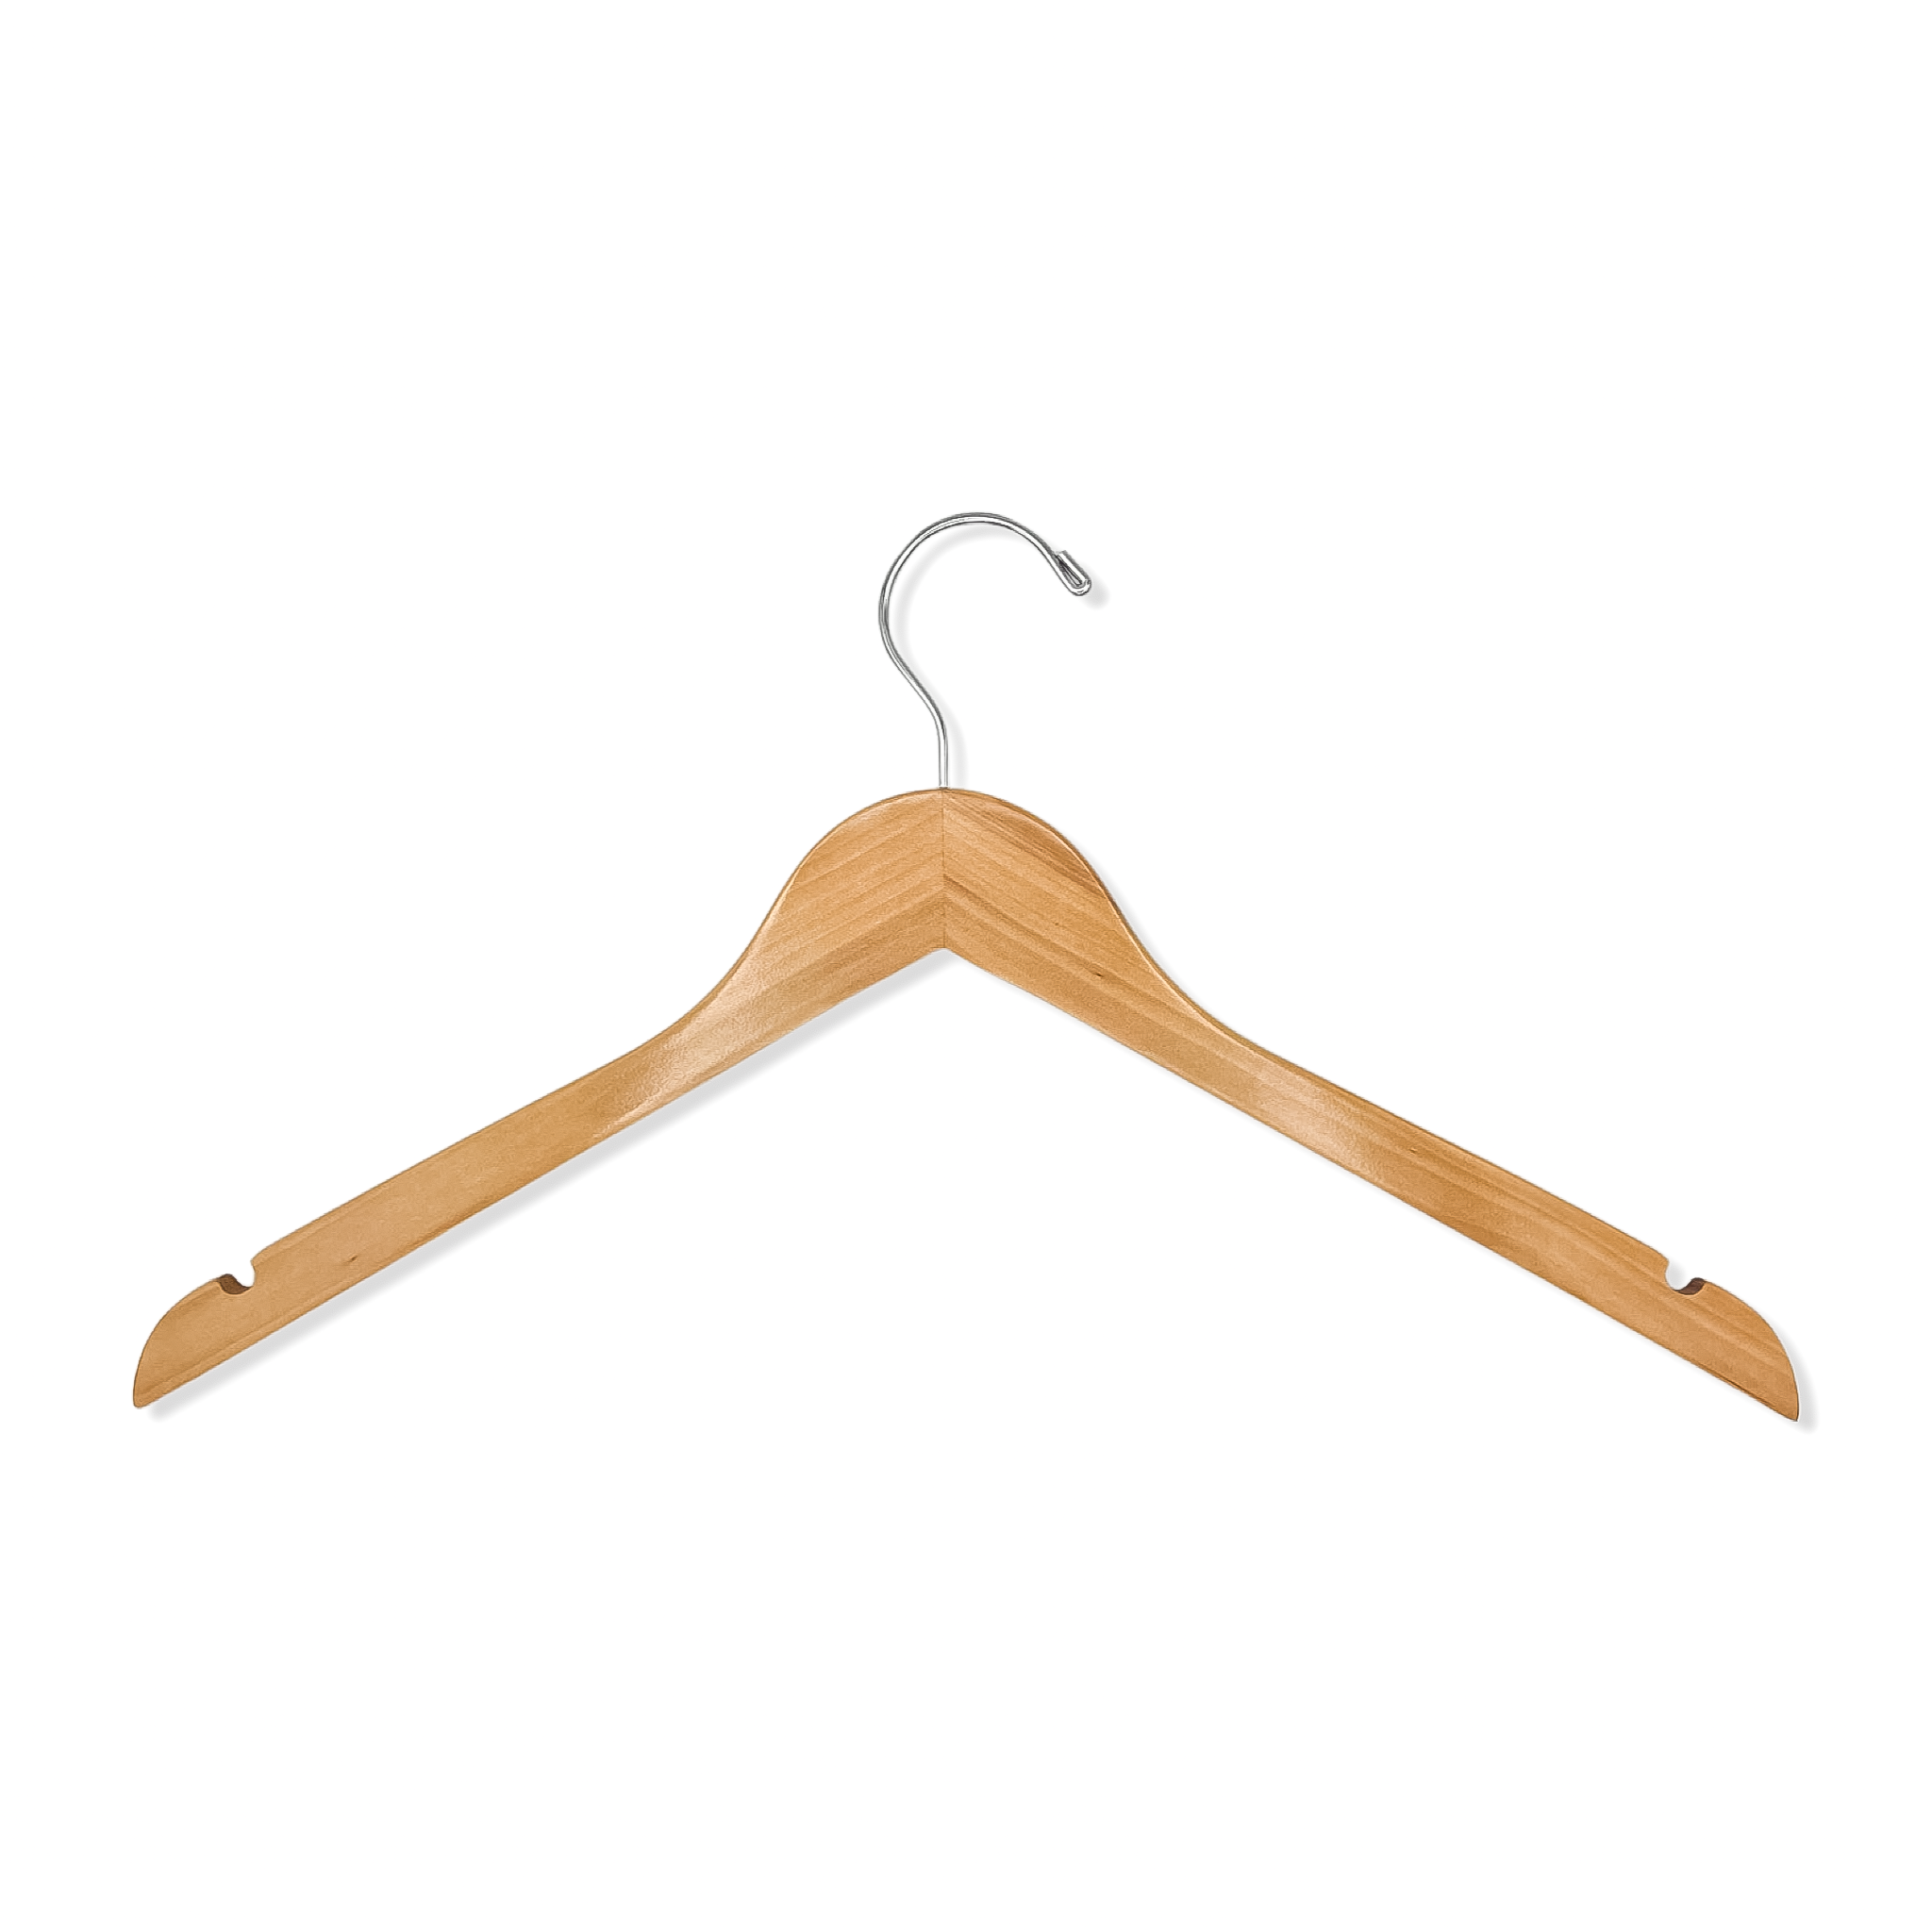 A Royal Hangers Natural Wooden Adult Top Hanger with shoulder notches and a silver hook for custom bridal hanger designers